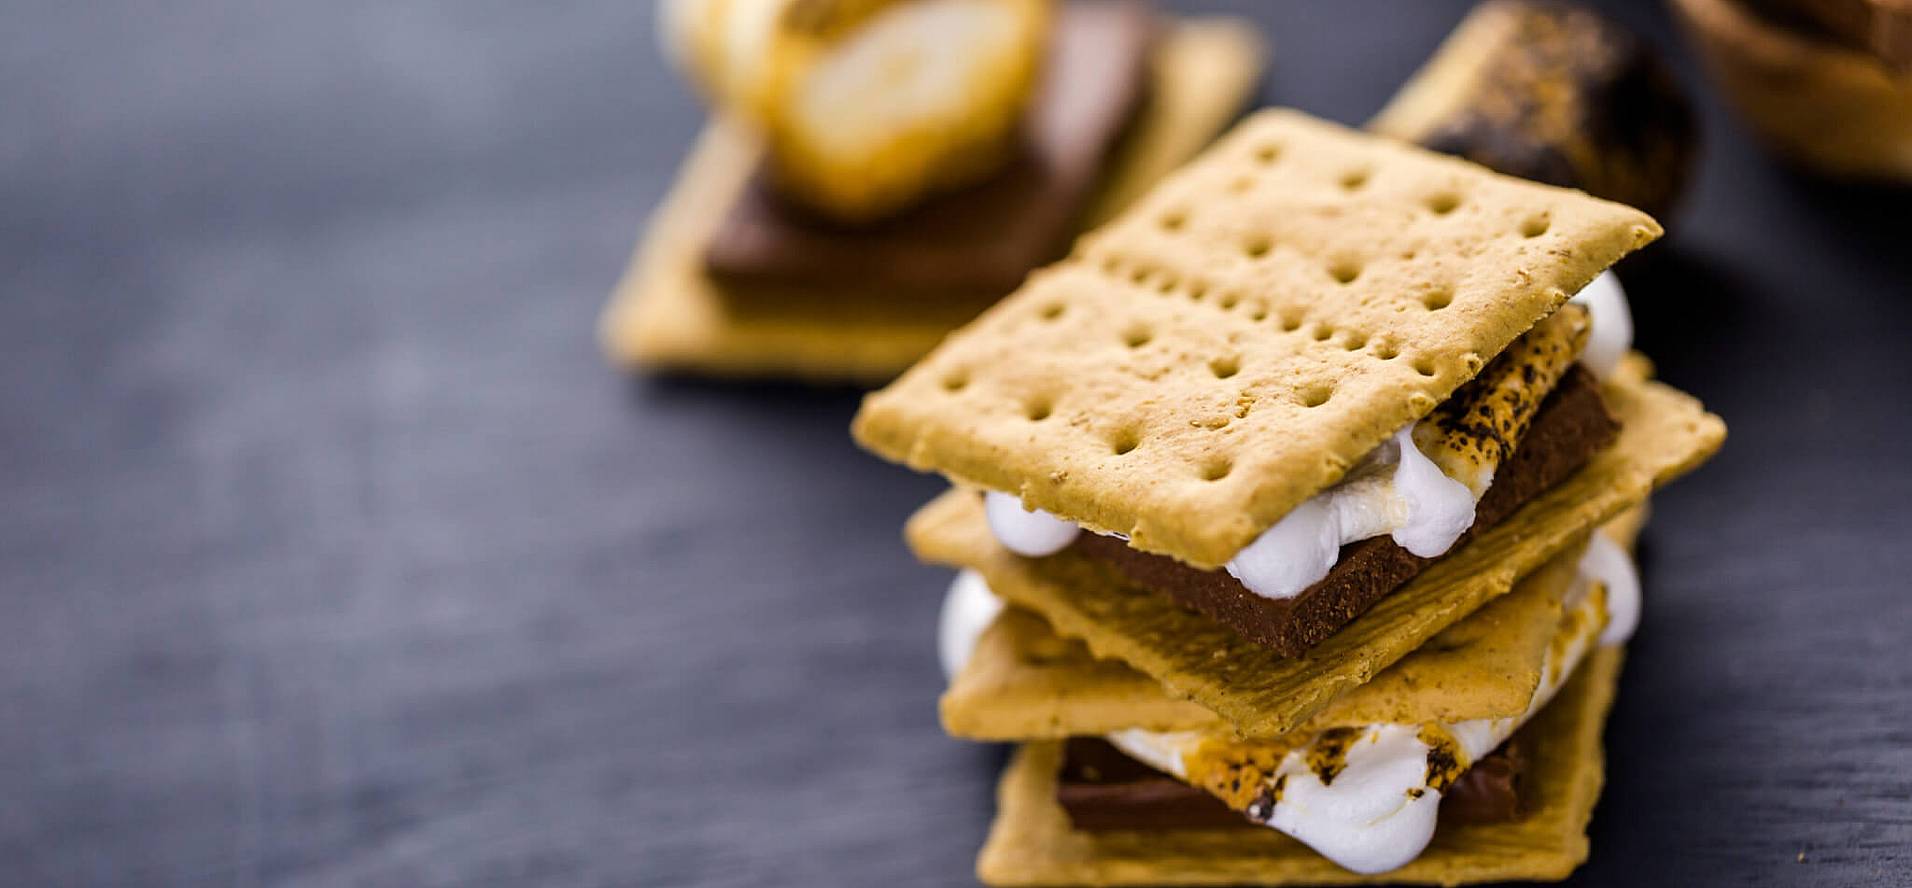 National S'mores Day (August 10th) Days Of The Year